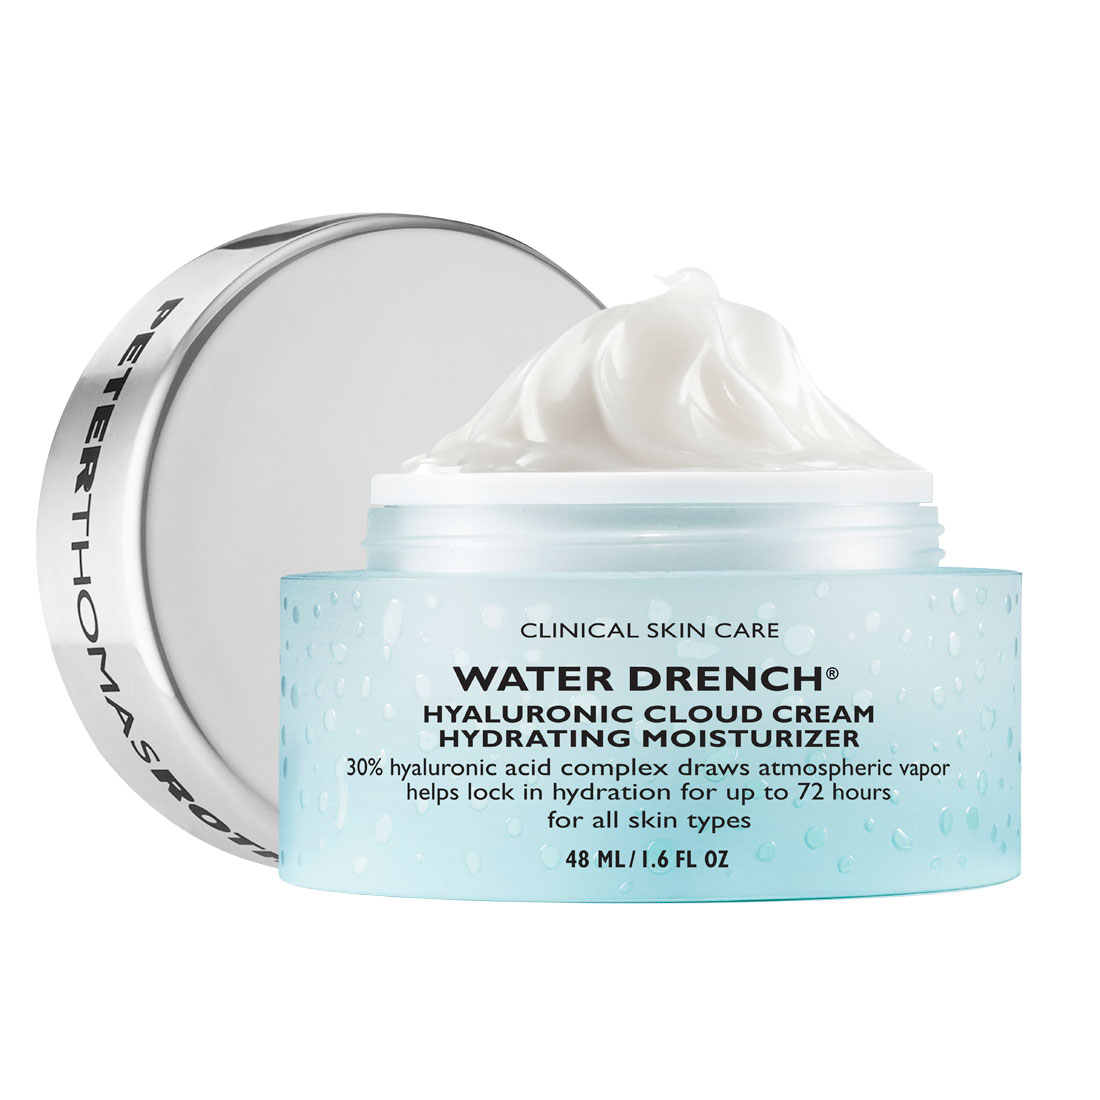 Peter Thomas Roth Water Drench Cloud Cream 50 ml